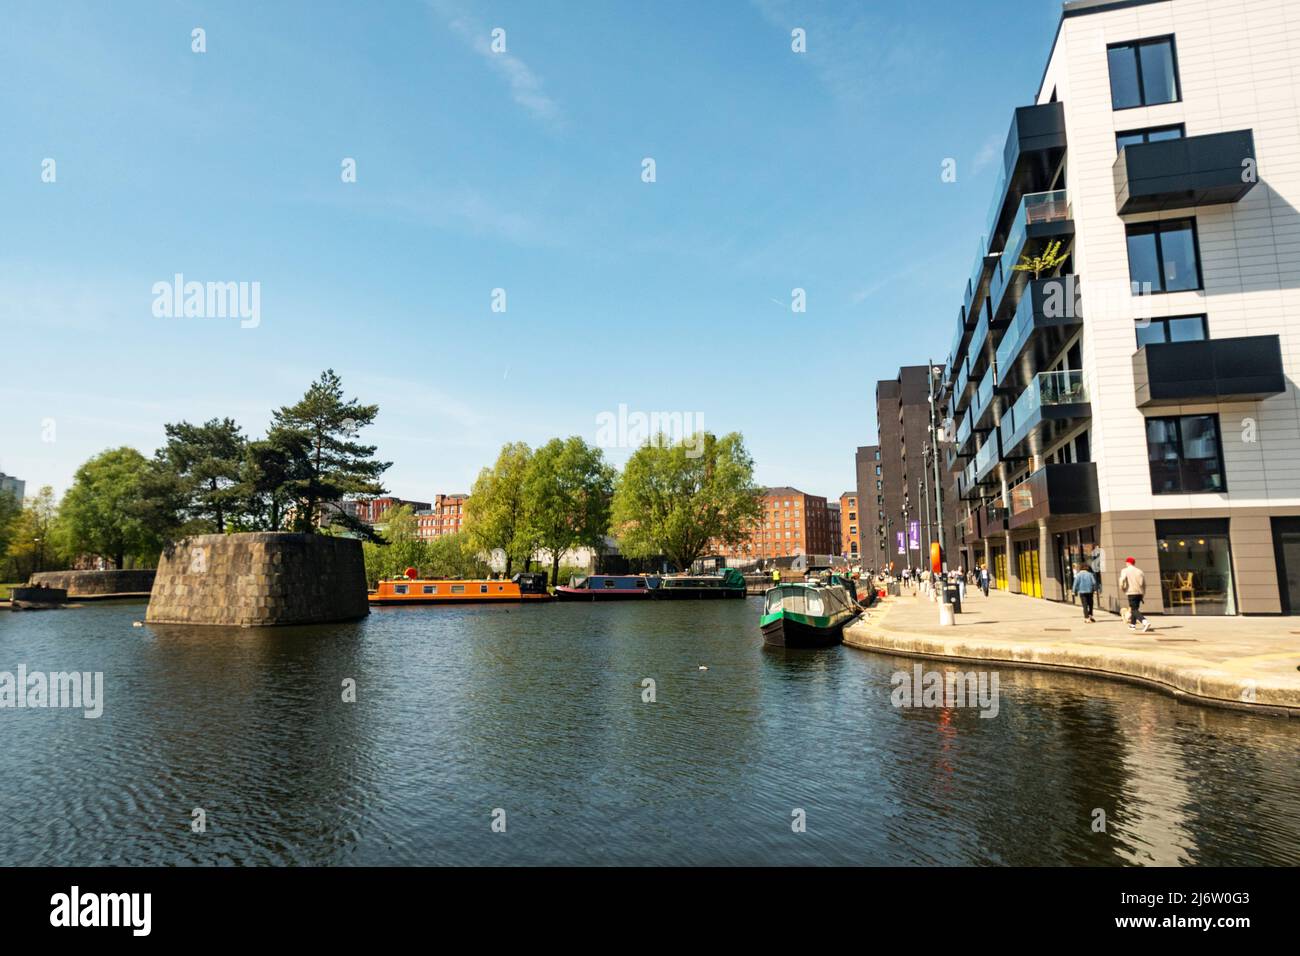 New Islington, a regenerated area of Manchester previously associated with the mills from the cotton industry. Stock Photo